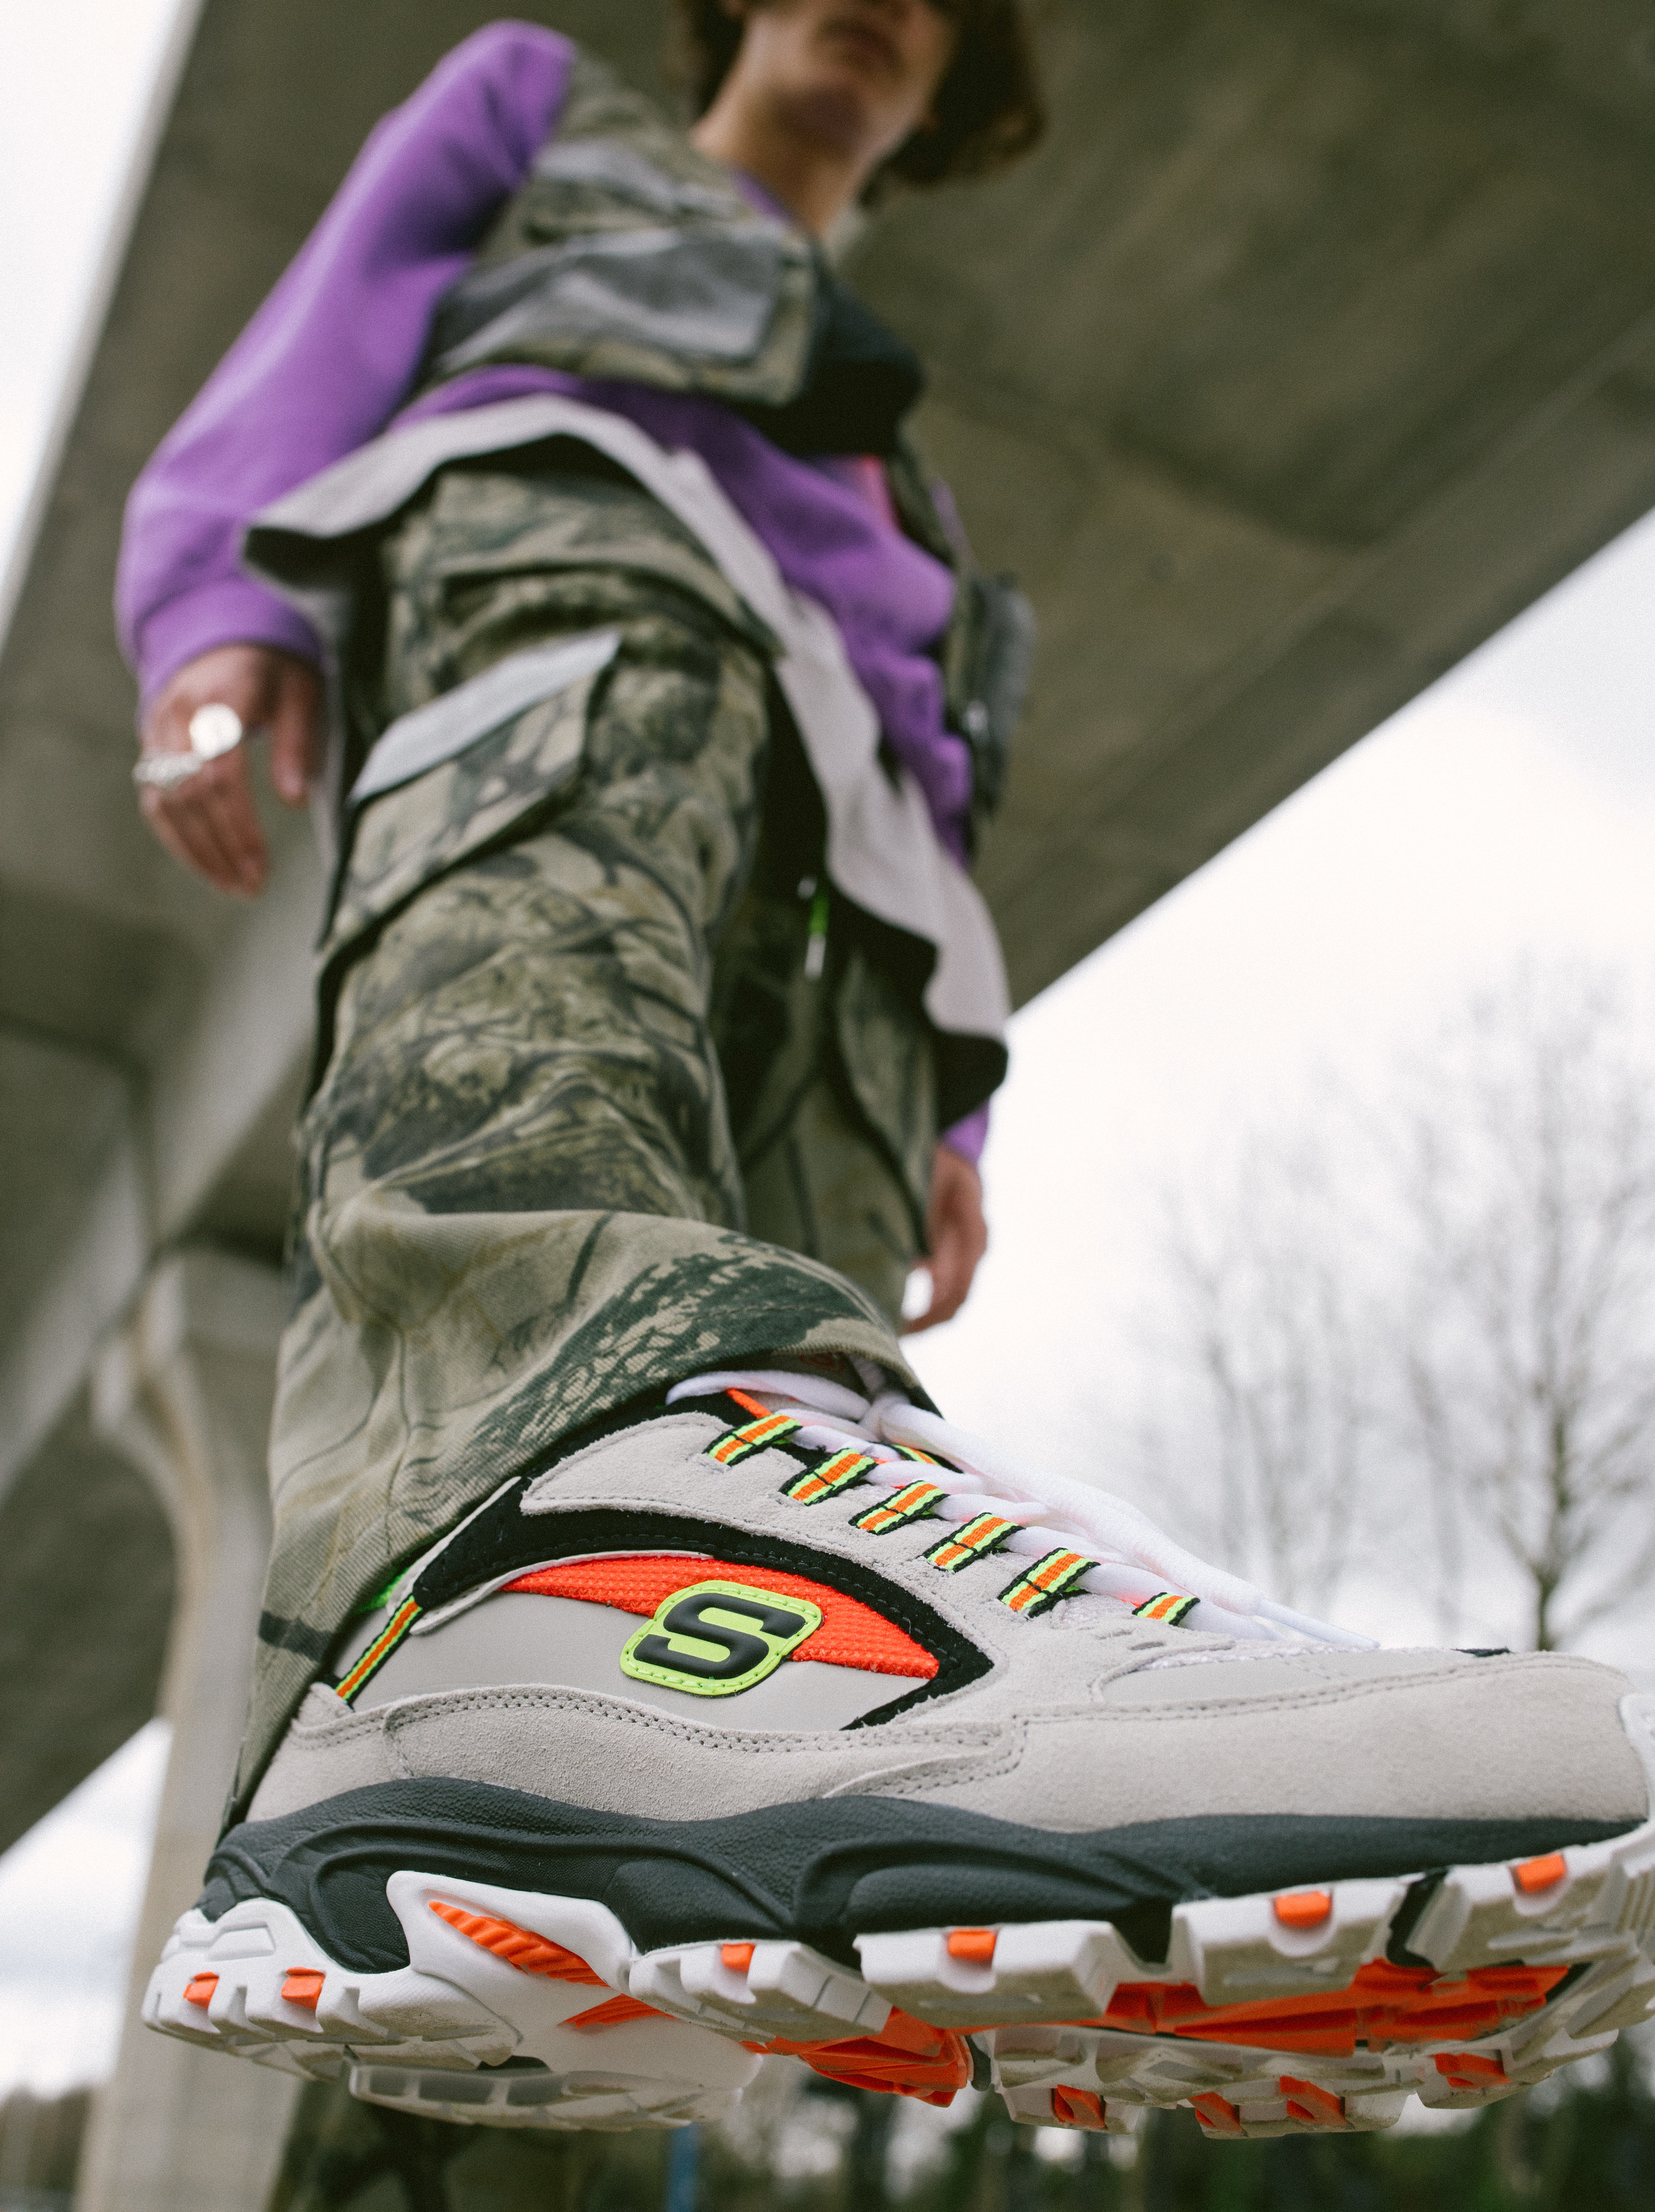 PAUSE x Skechers: Spring/Summer 2019 Editorial – PAUSE Online | Fashion, Street Style, Fashion News Streetwear